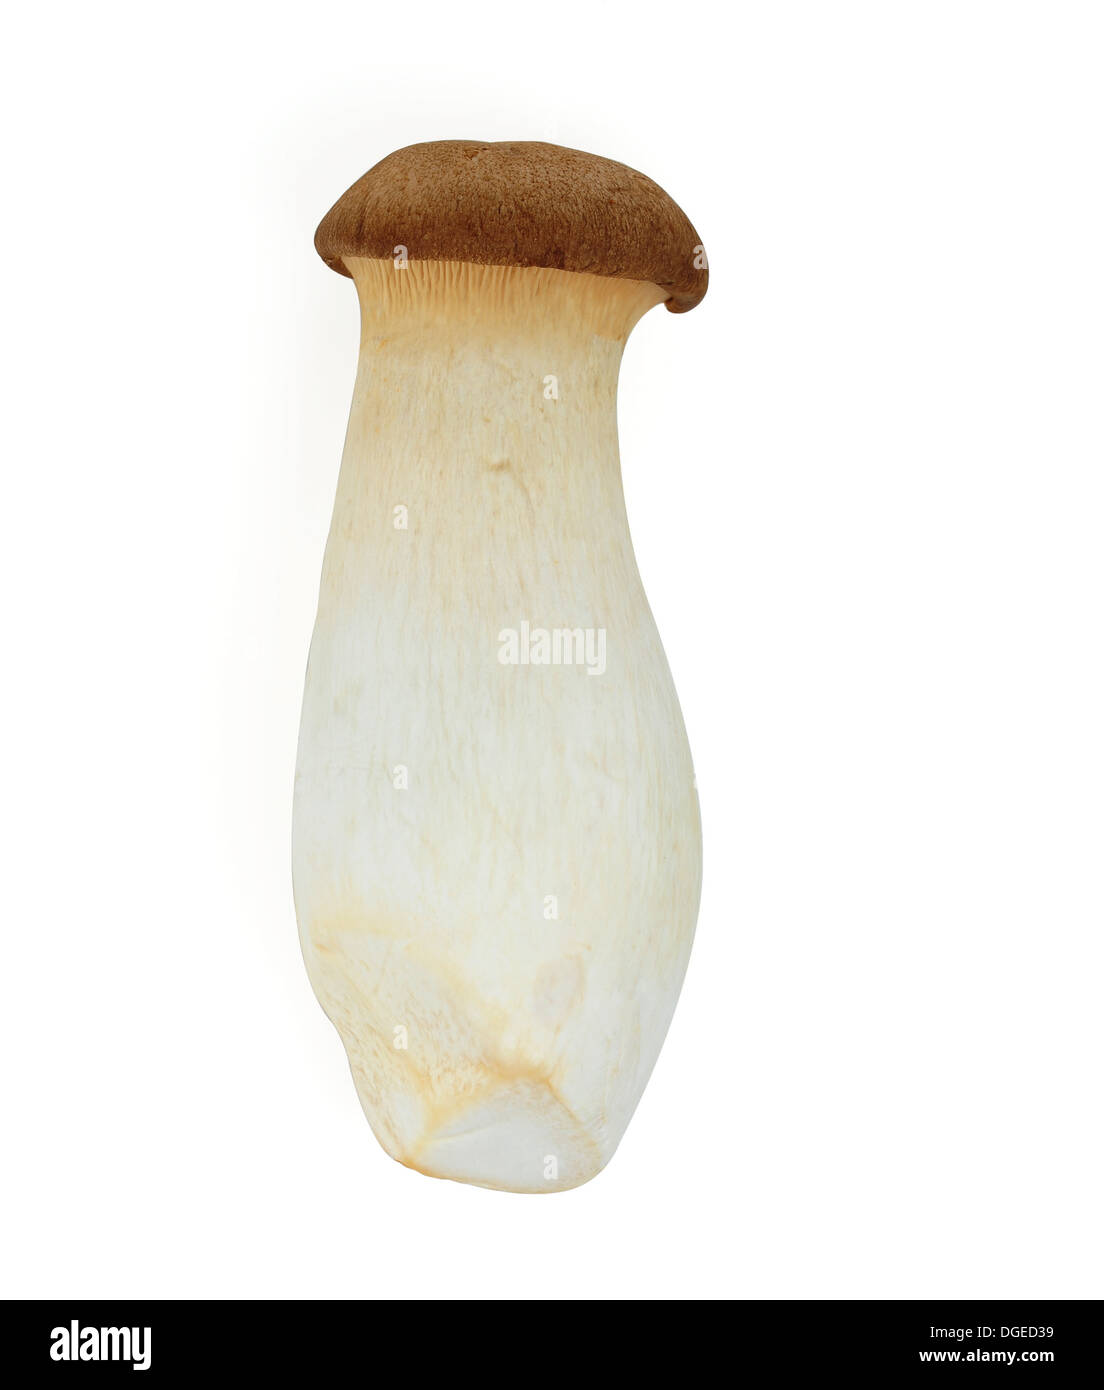 Edible Mushroom with Clipping Path Stock Photo